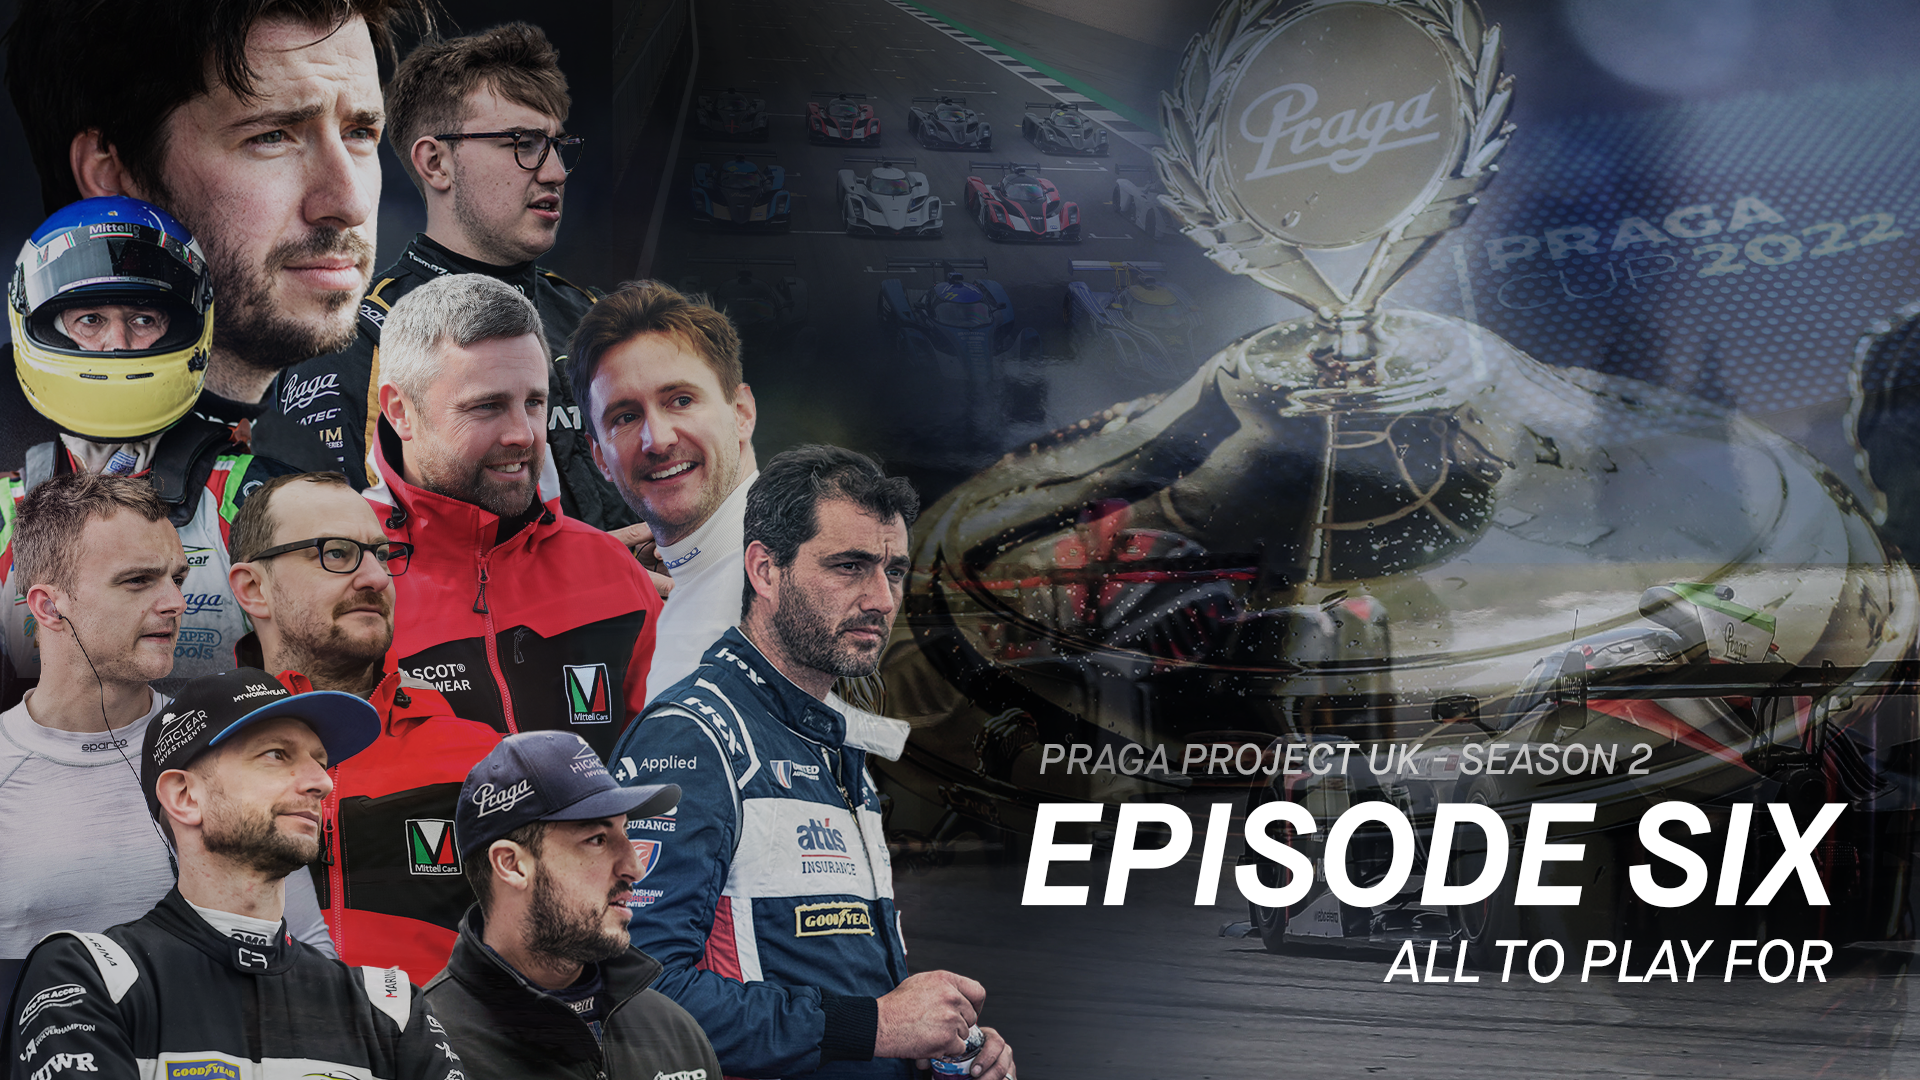 Season 2, Episode 6 – Who will take home the biggest prize in UK motorsport?